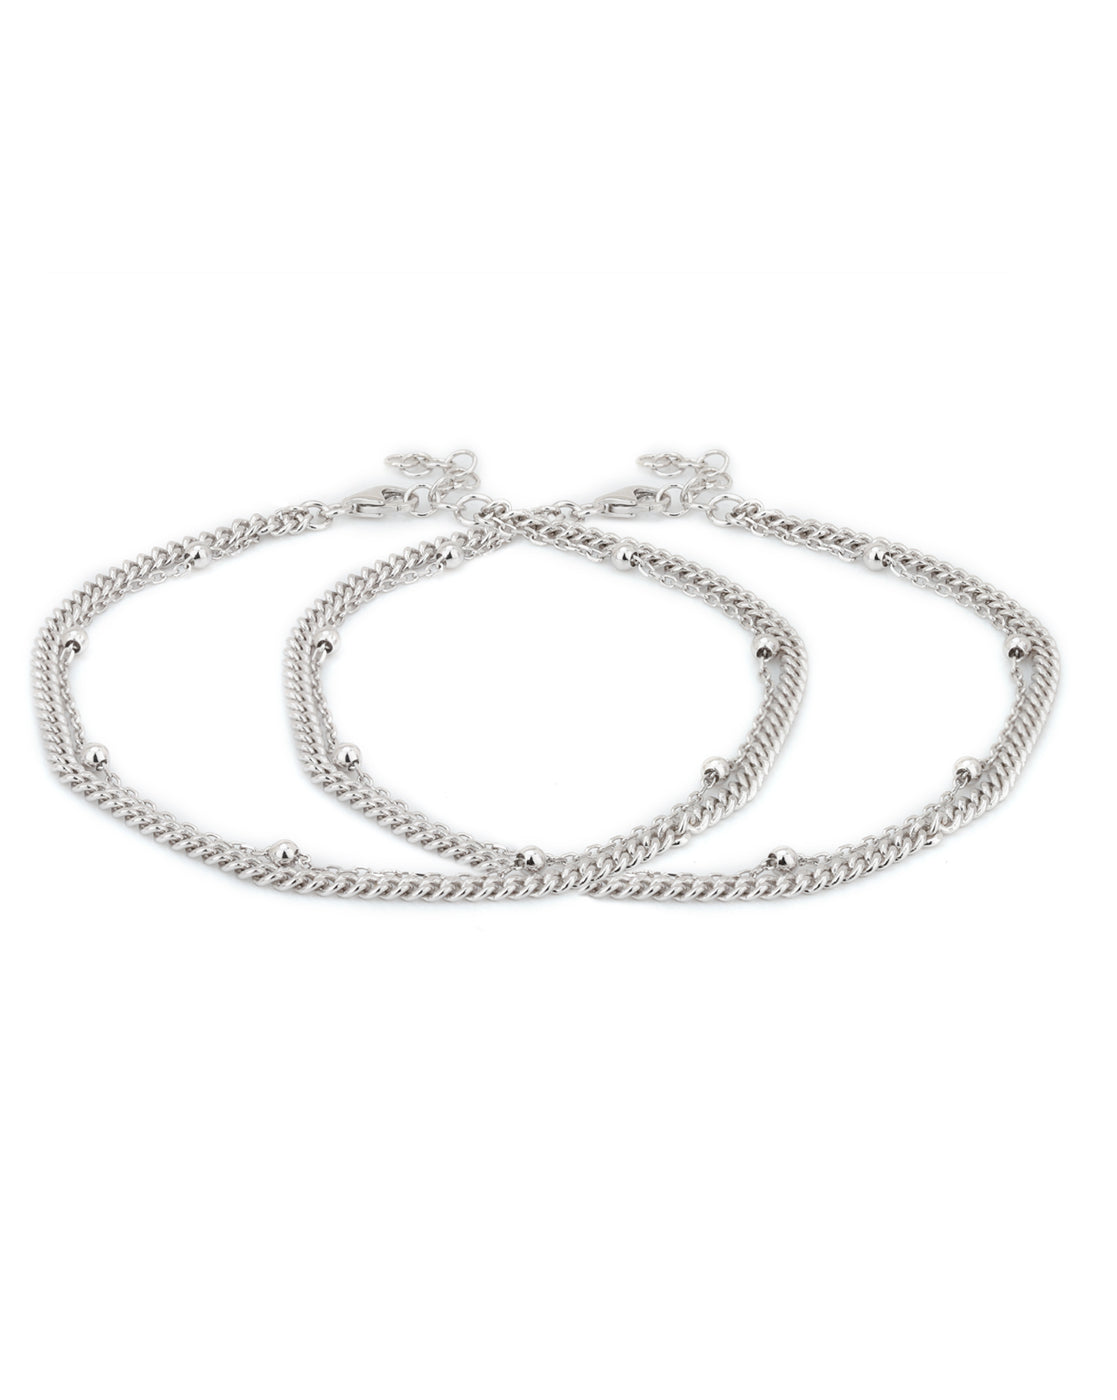 Carlton London -Set Of 2 Rhodium-Plated Silver Toned Silver Beaded Layered Anklets For Women